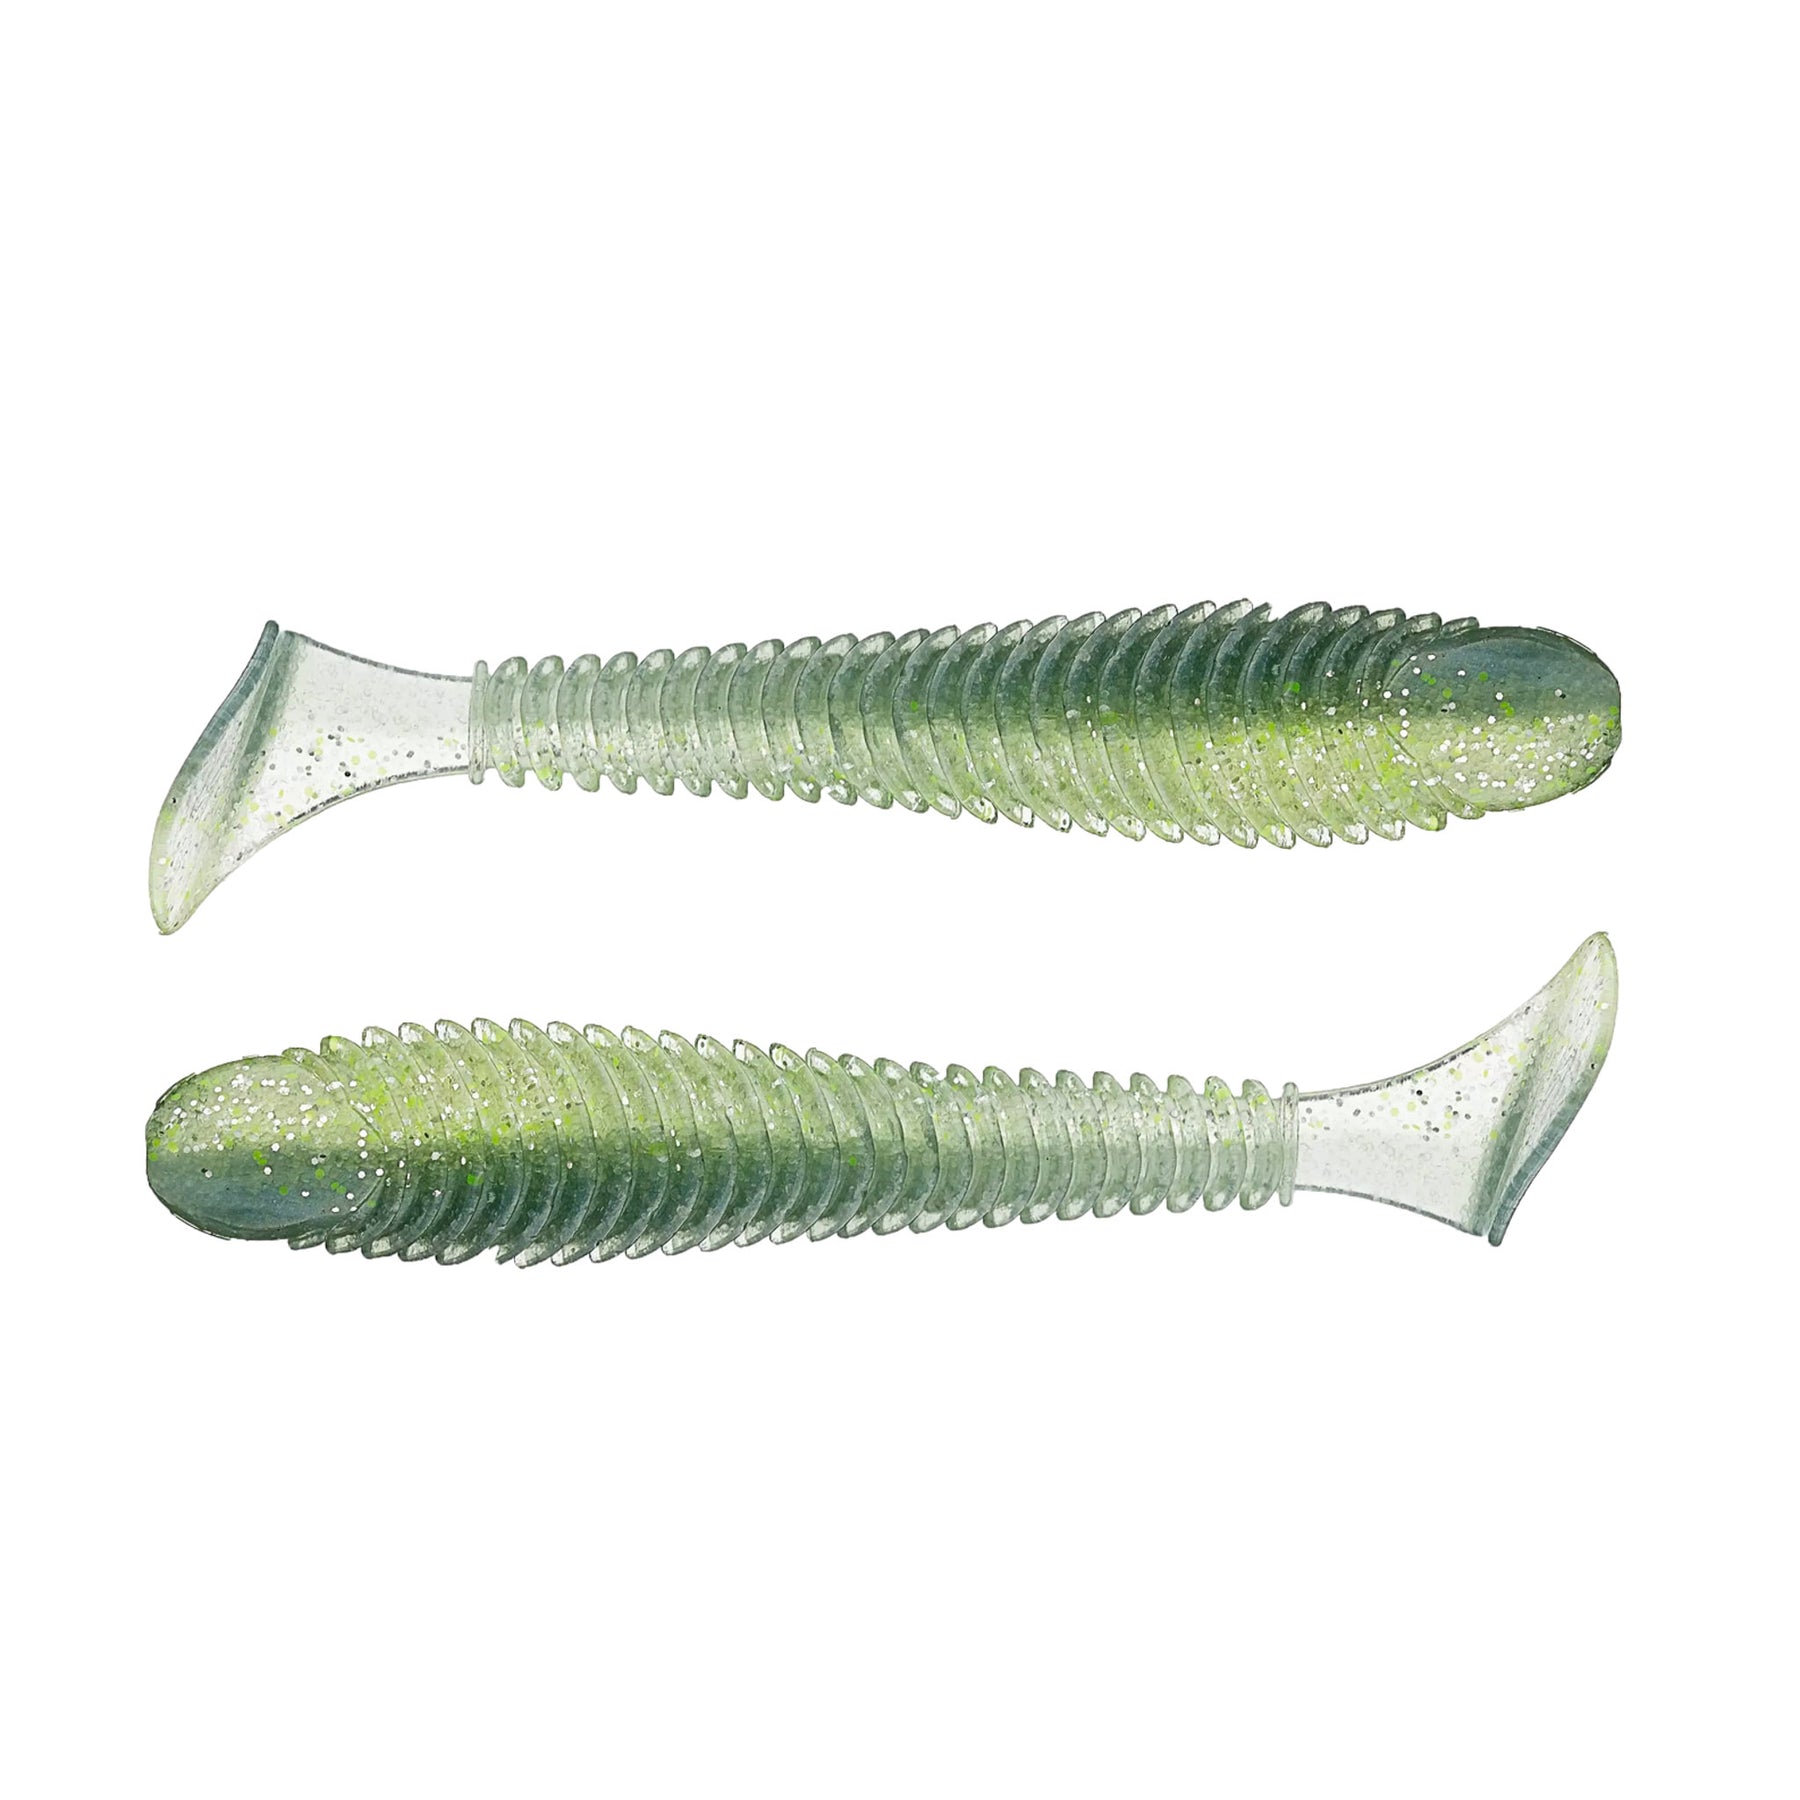 (3) Googan Saucy Swimmer 3.8'' Paddle Tail Swimbait - Like Keitech (Pick  Color)